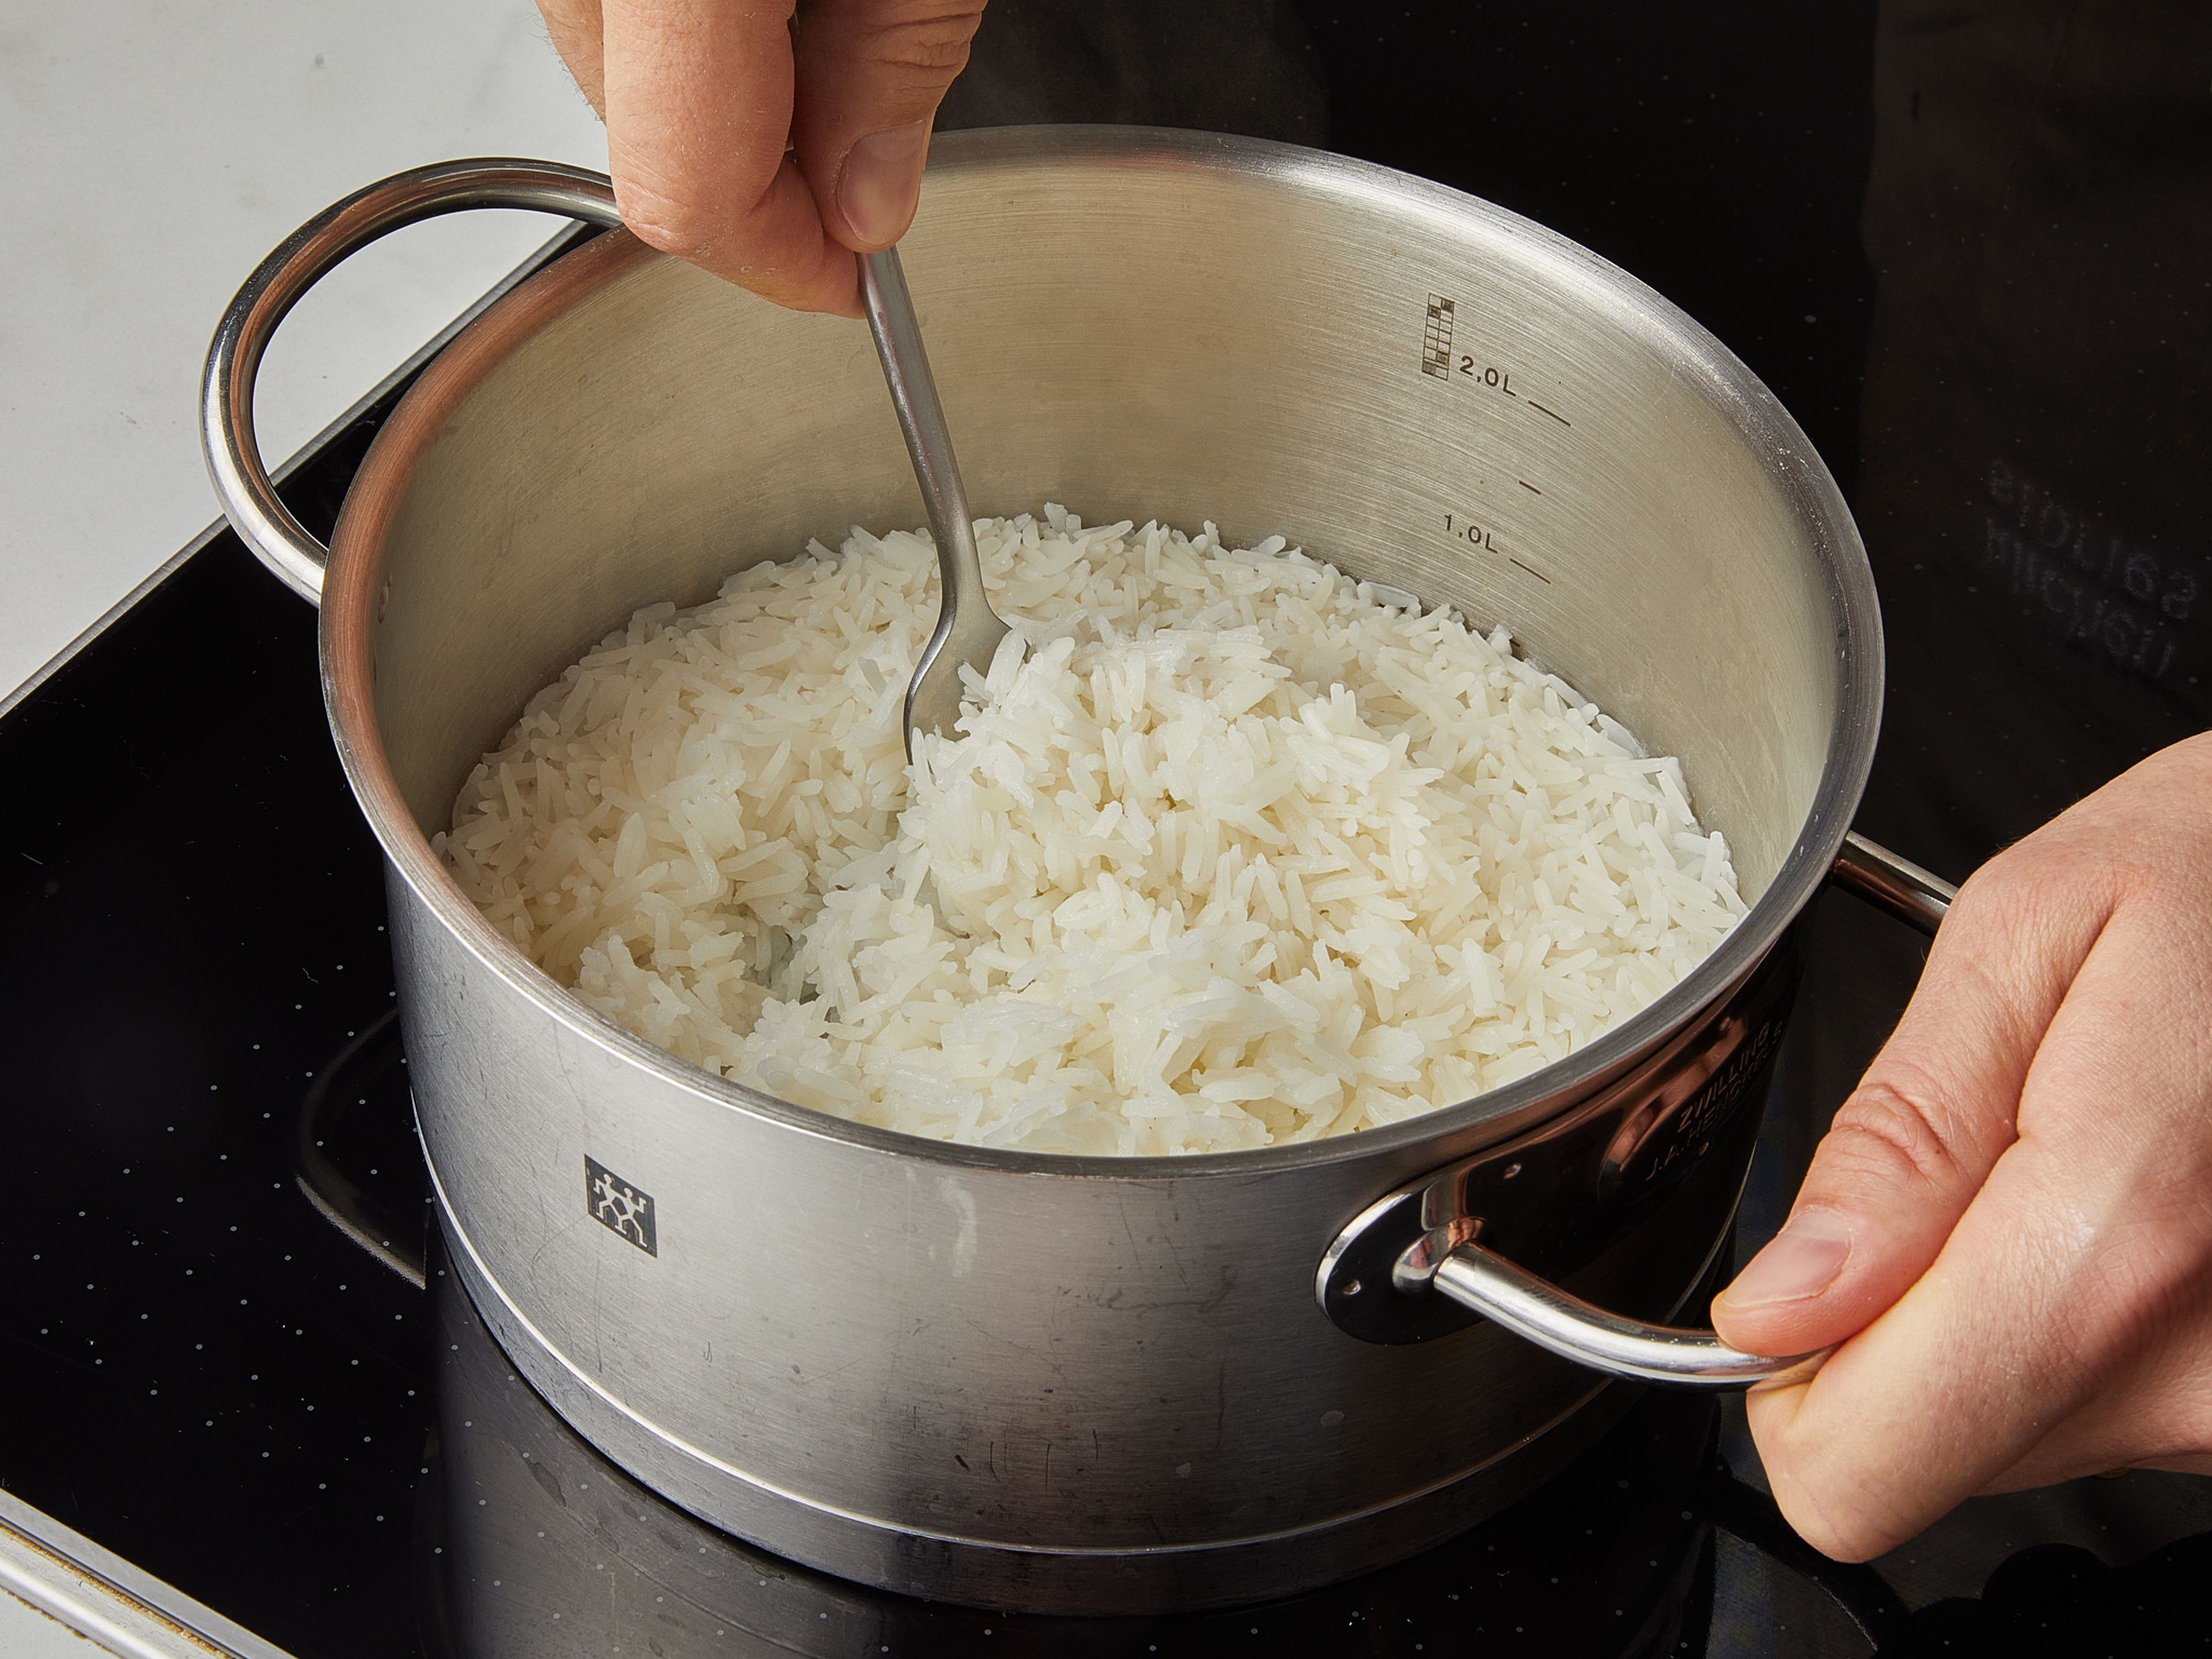 When the eggs are ready,  rinse jasmine rice with water until the water runs clear. Then add to a pot with lid. Add water, cover, and bring to a boil. Once boiling, reduce heat to low and cook for approx. 10 min. Then turn off the heat, let steam for 5 min. more. Serve 2 eggs over each bowl of cooked rice, scoop about 2 tbsp marinade as a sauce over the rice. Garnish with toasted sesame seeds and scallions.